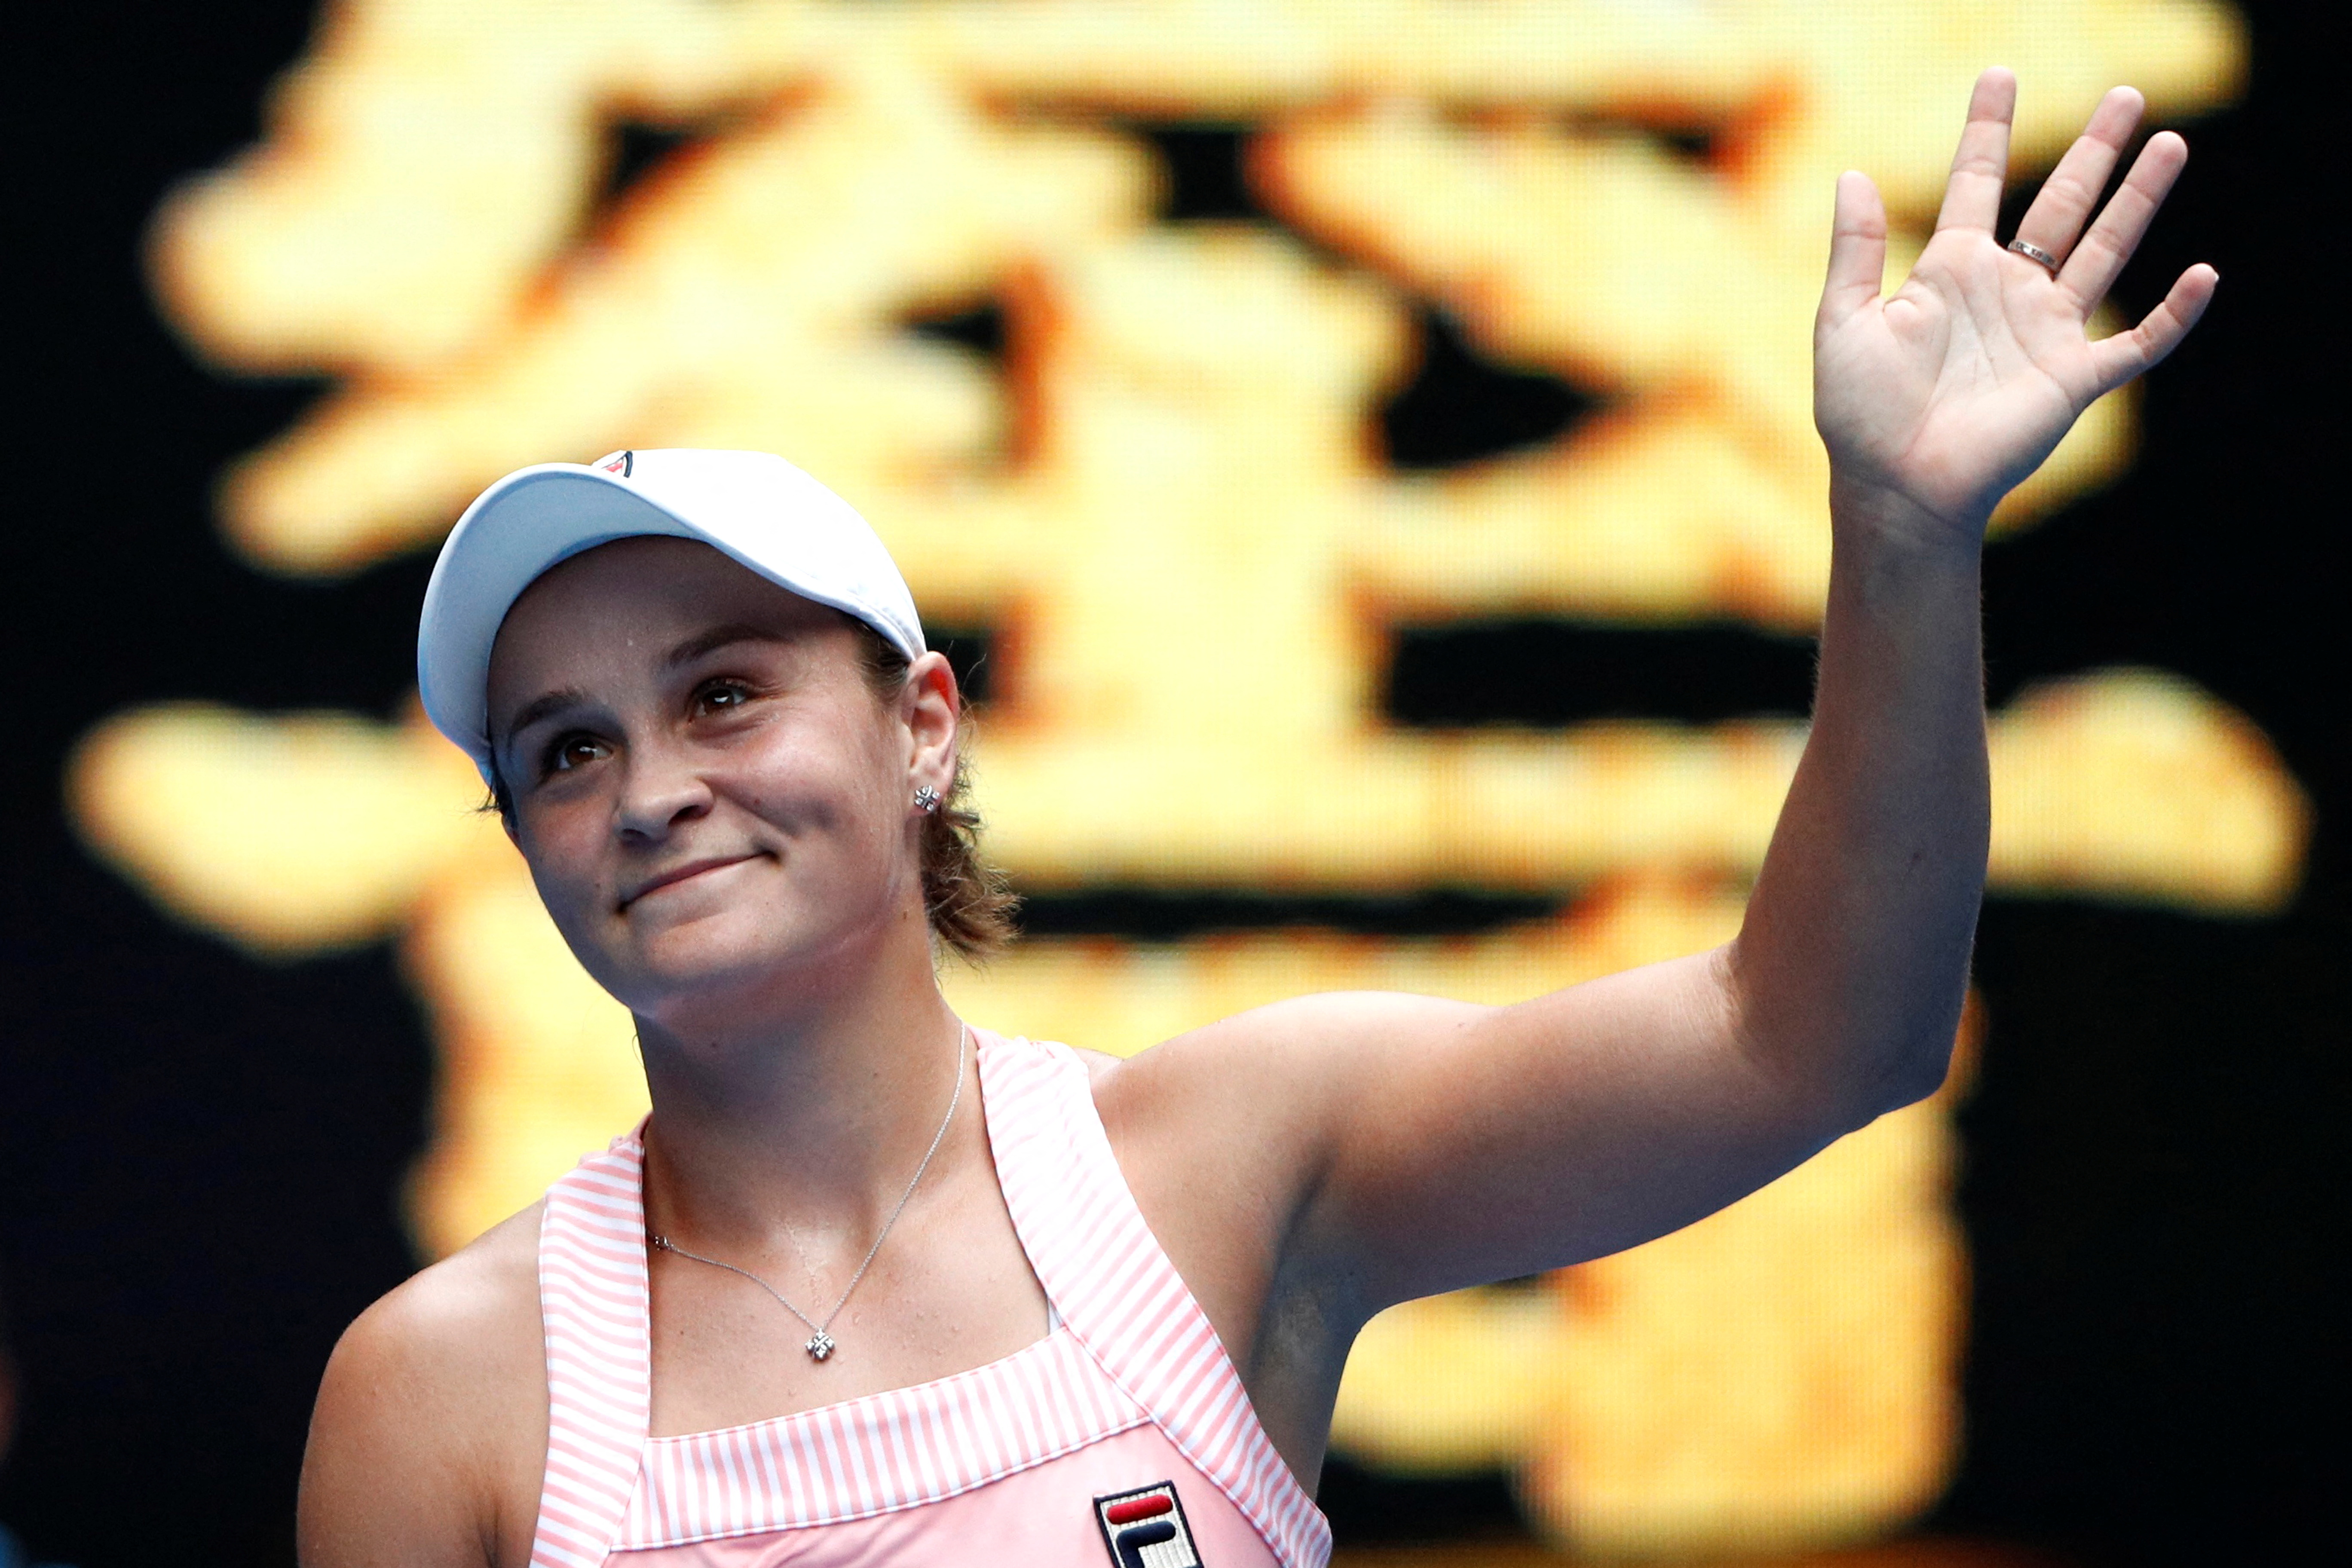 Australia's Ashleigh Barty waves to spectators after winning the match against China's Wang Yafan